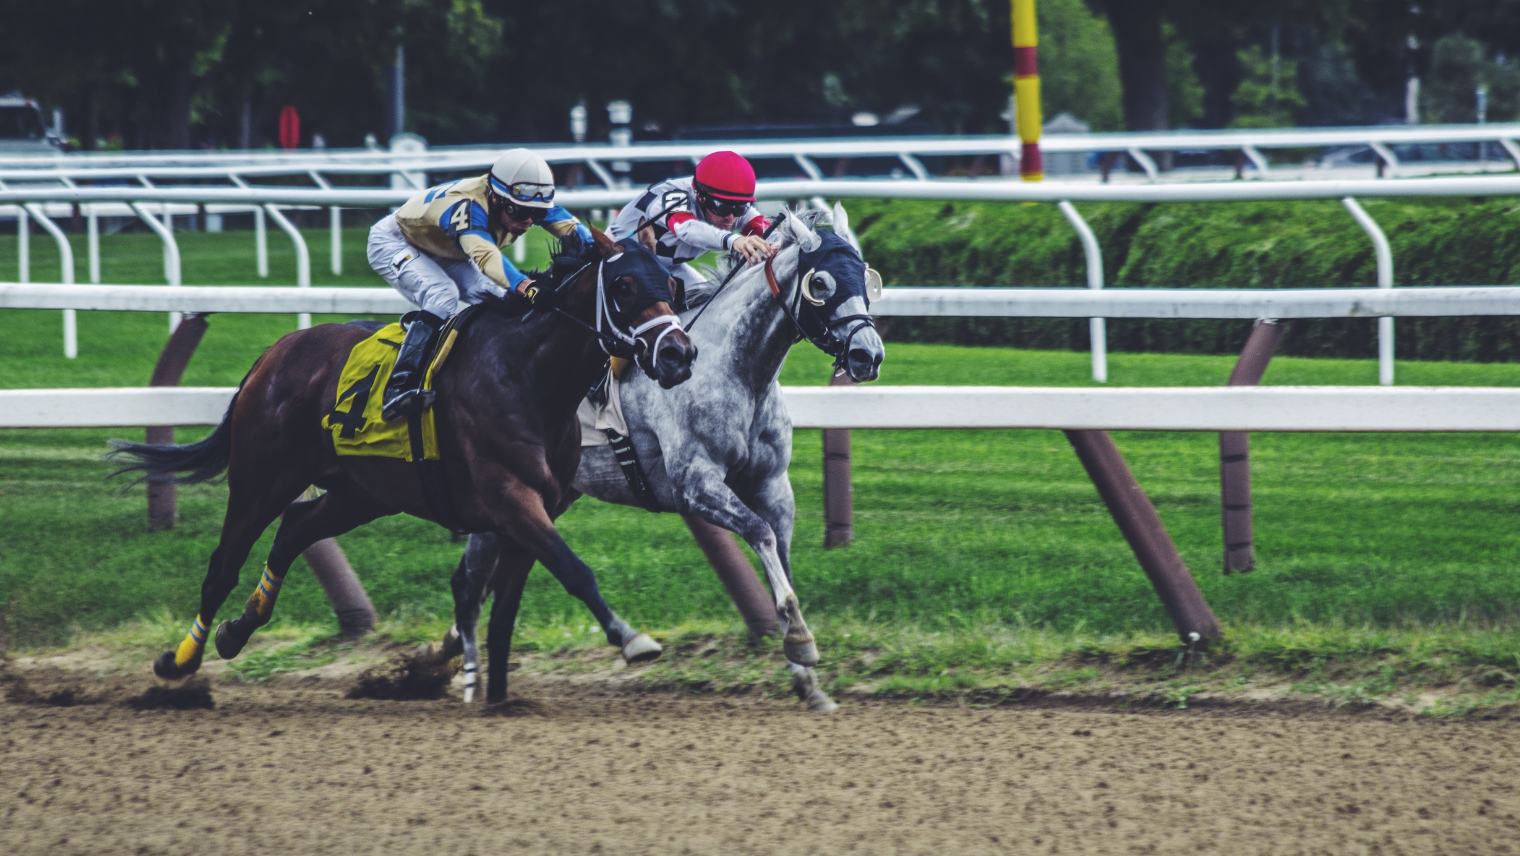 An image of two people horse racing